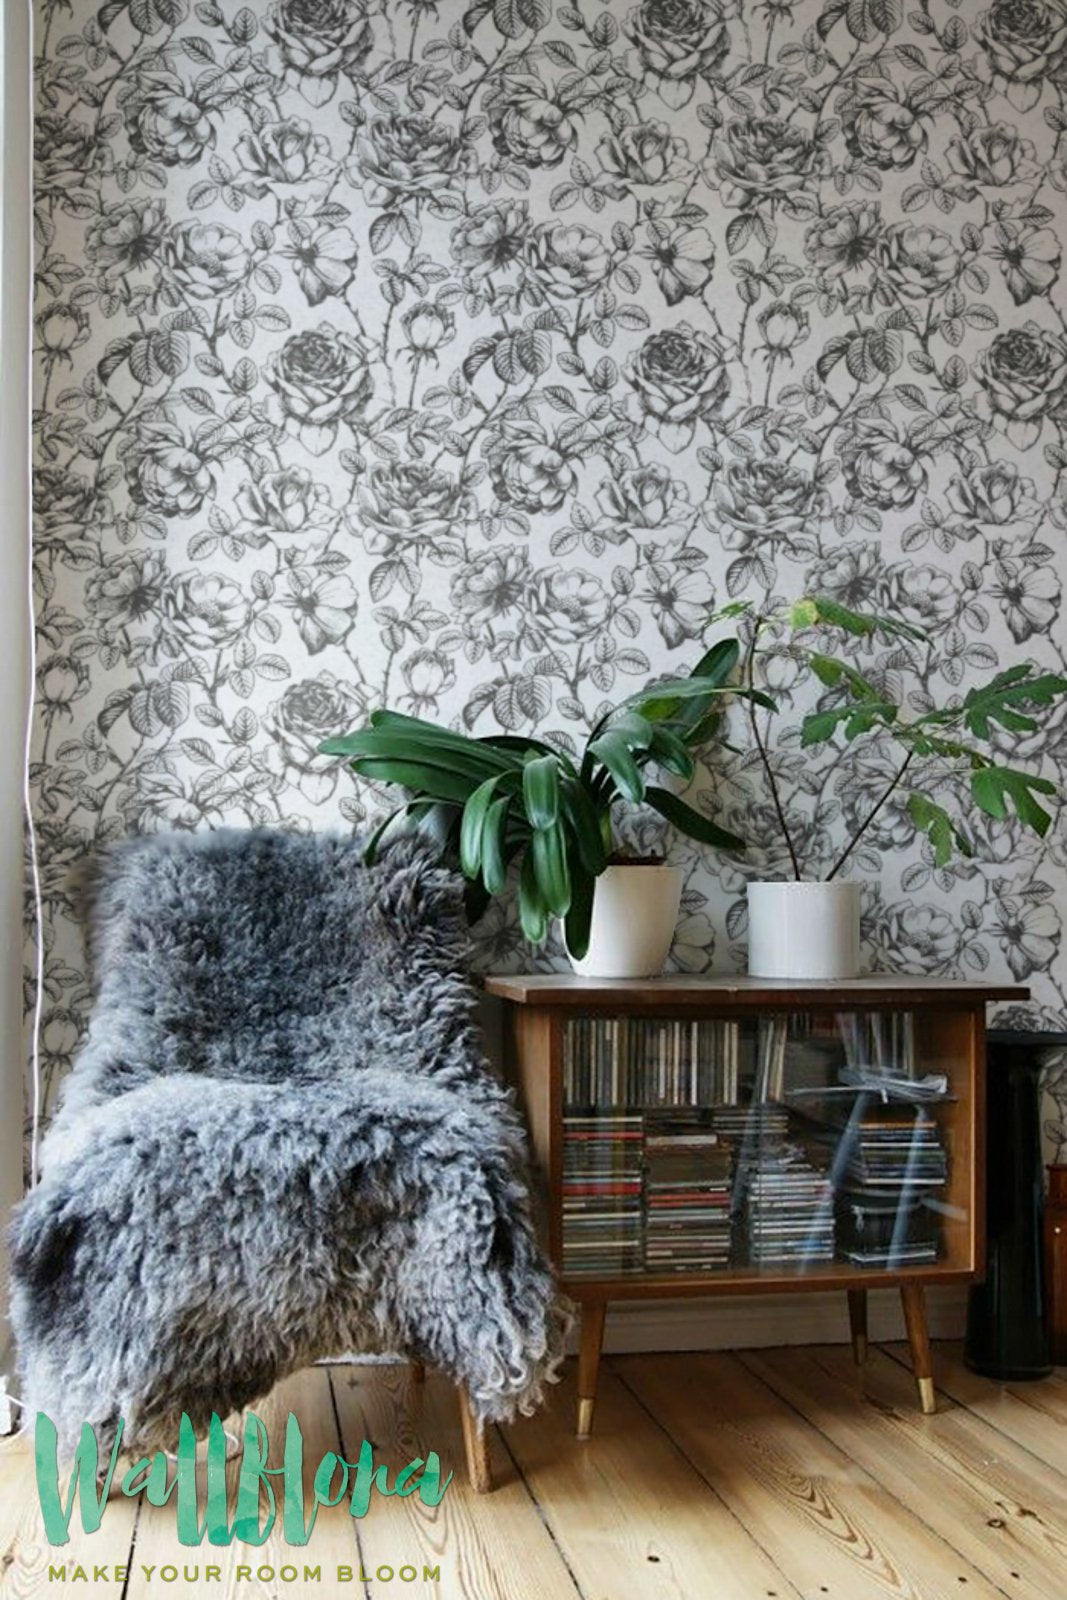 Black And White Roses Removable Wallpaper